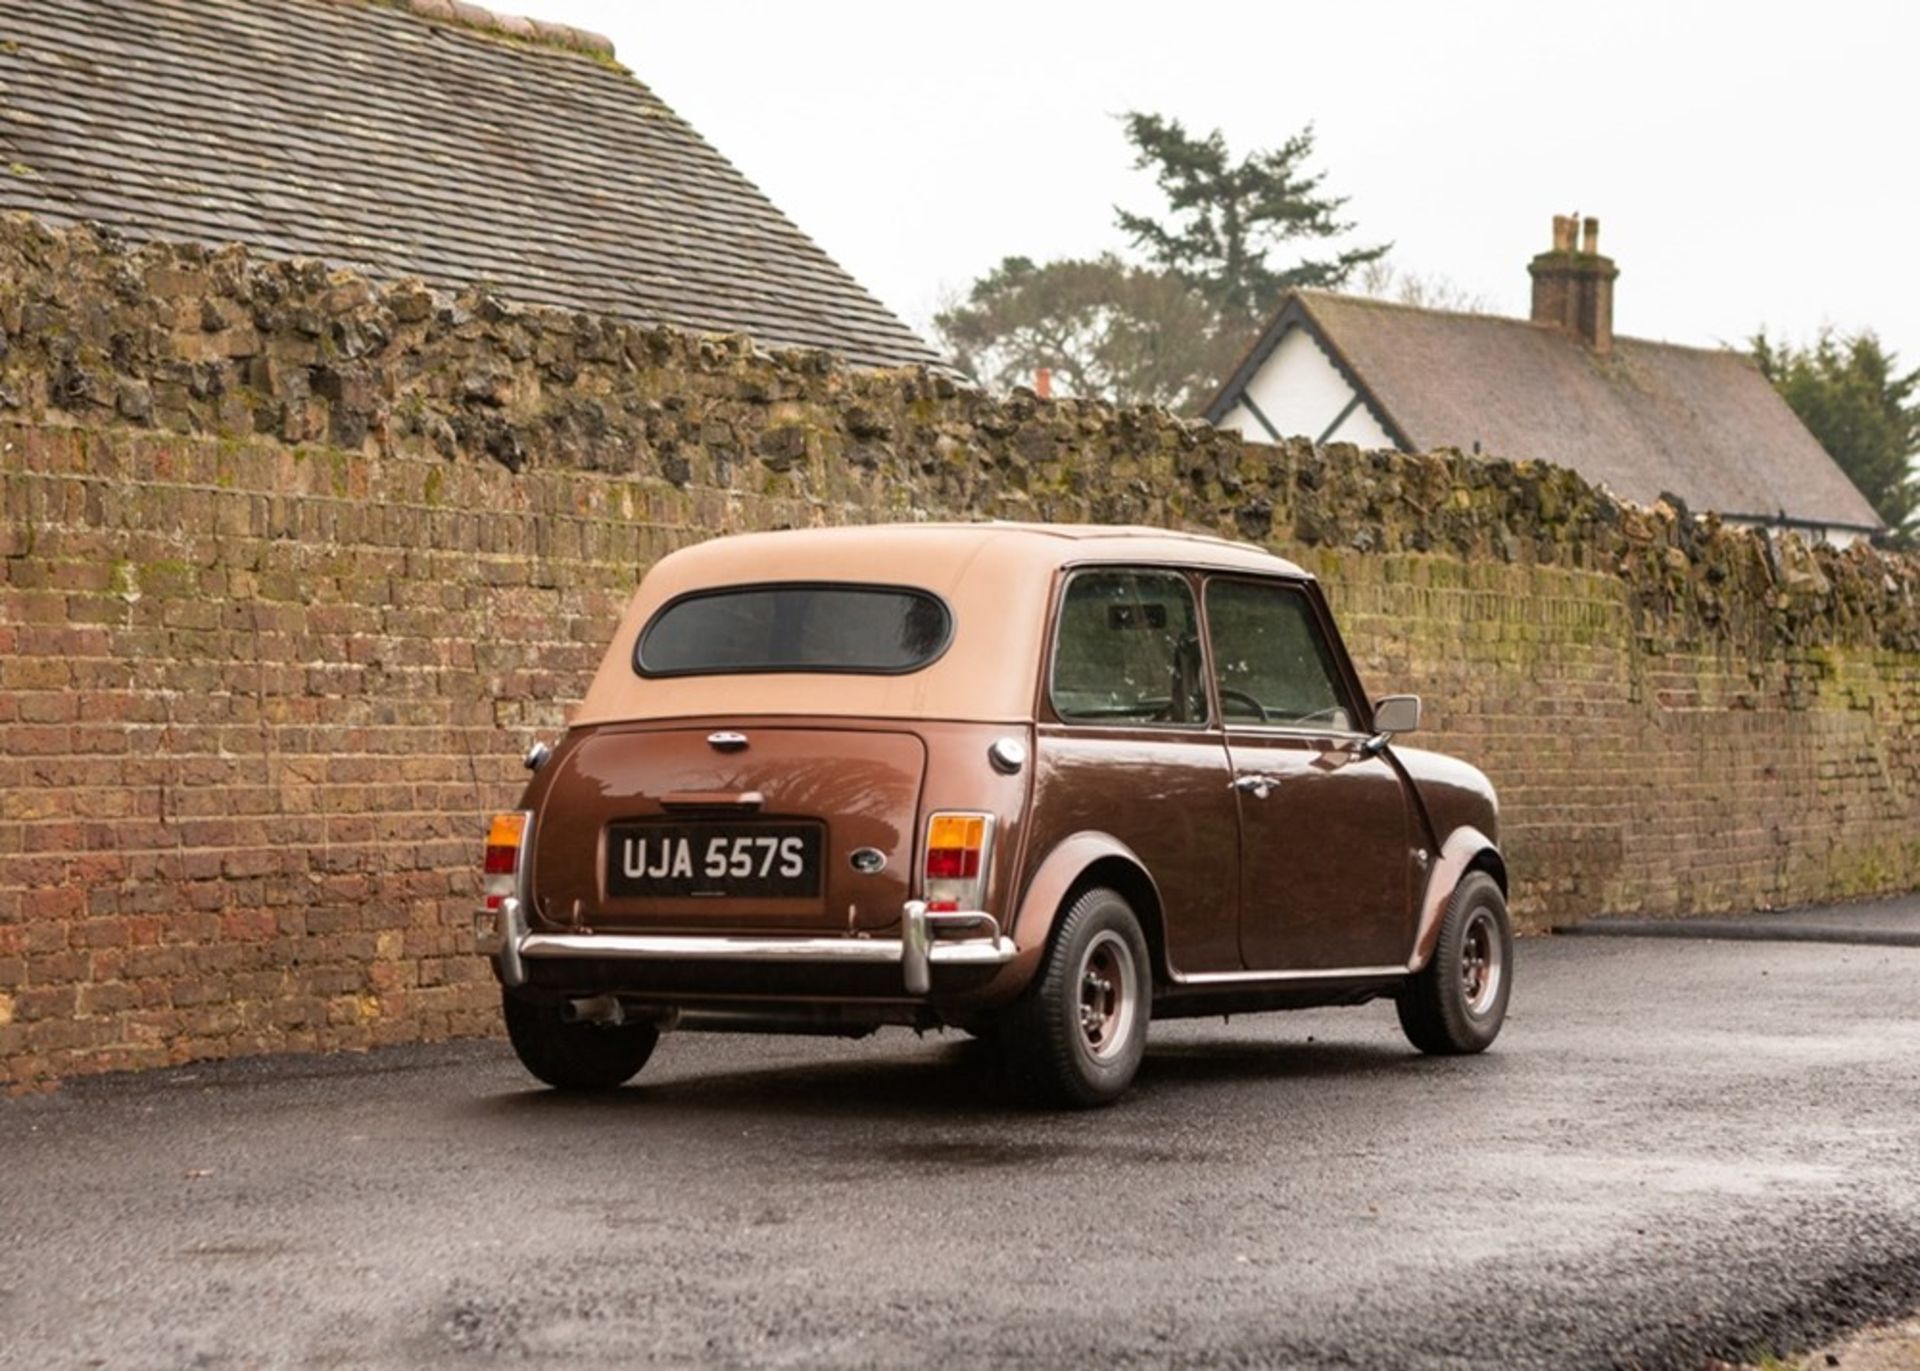 1976 Mini ‘Margrave’ by Wood & Pickett (1293cc) - Image 2 of 9